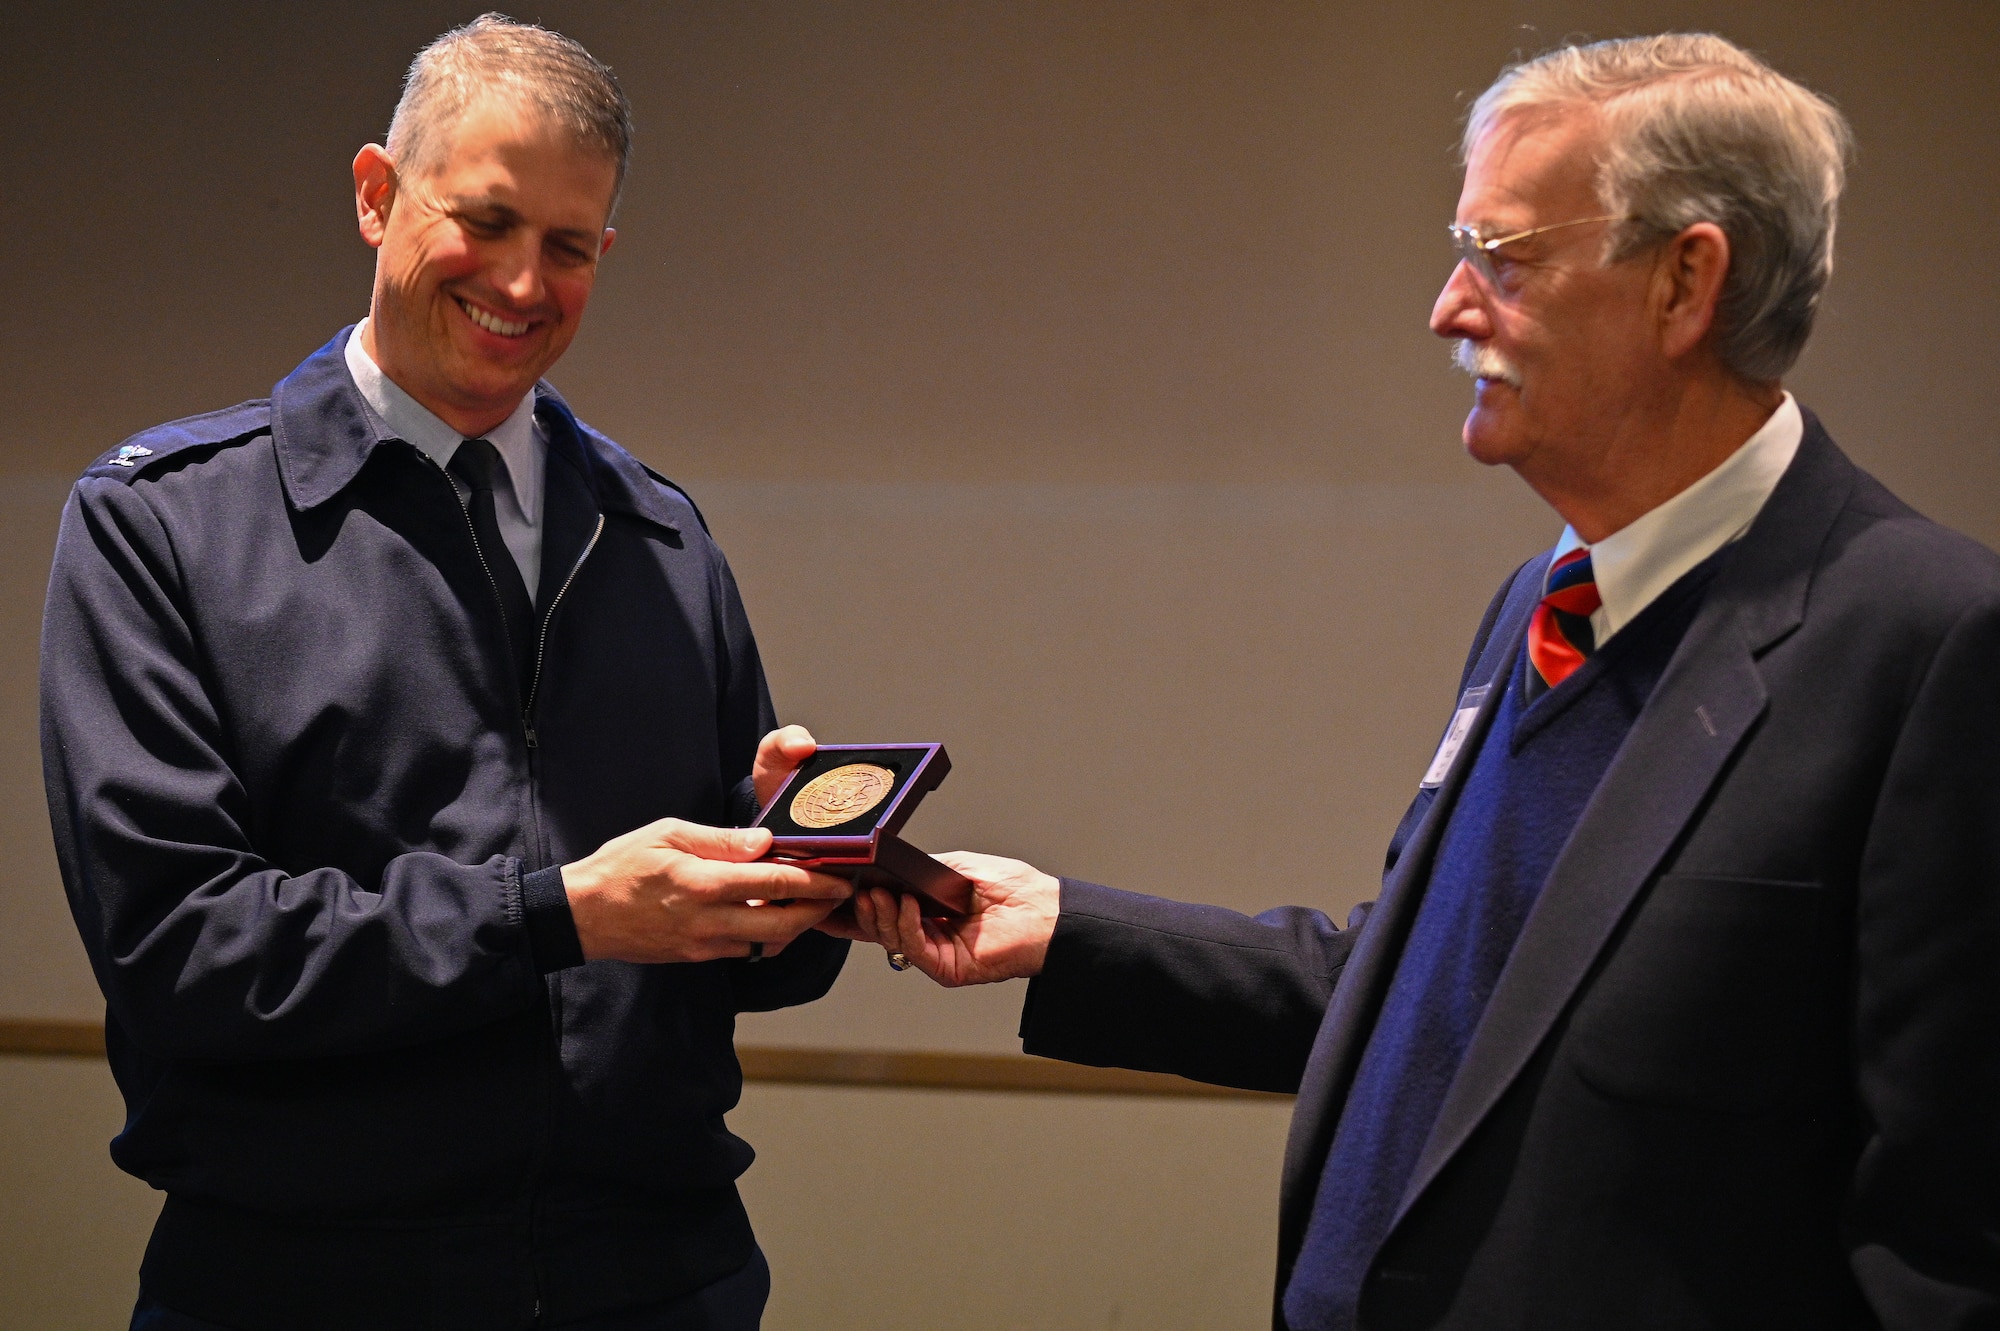 Col. Robert Long, Space Launch Delta 30 commander, receives a coin from the president of the Defense Orientation Conference Association on Vandenberg Space Force Base, Calif., March 29, 2022. DOCA is a nationwide nonprofit organization dedicated to continuing education in defense and national security affairs. (U.S. Space Force photo by Airman 1st Class Kadielle Shaw)